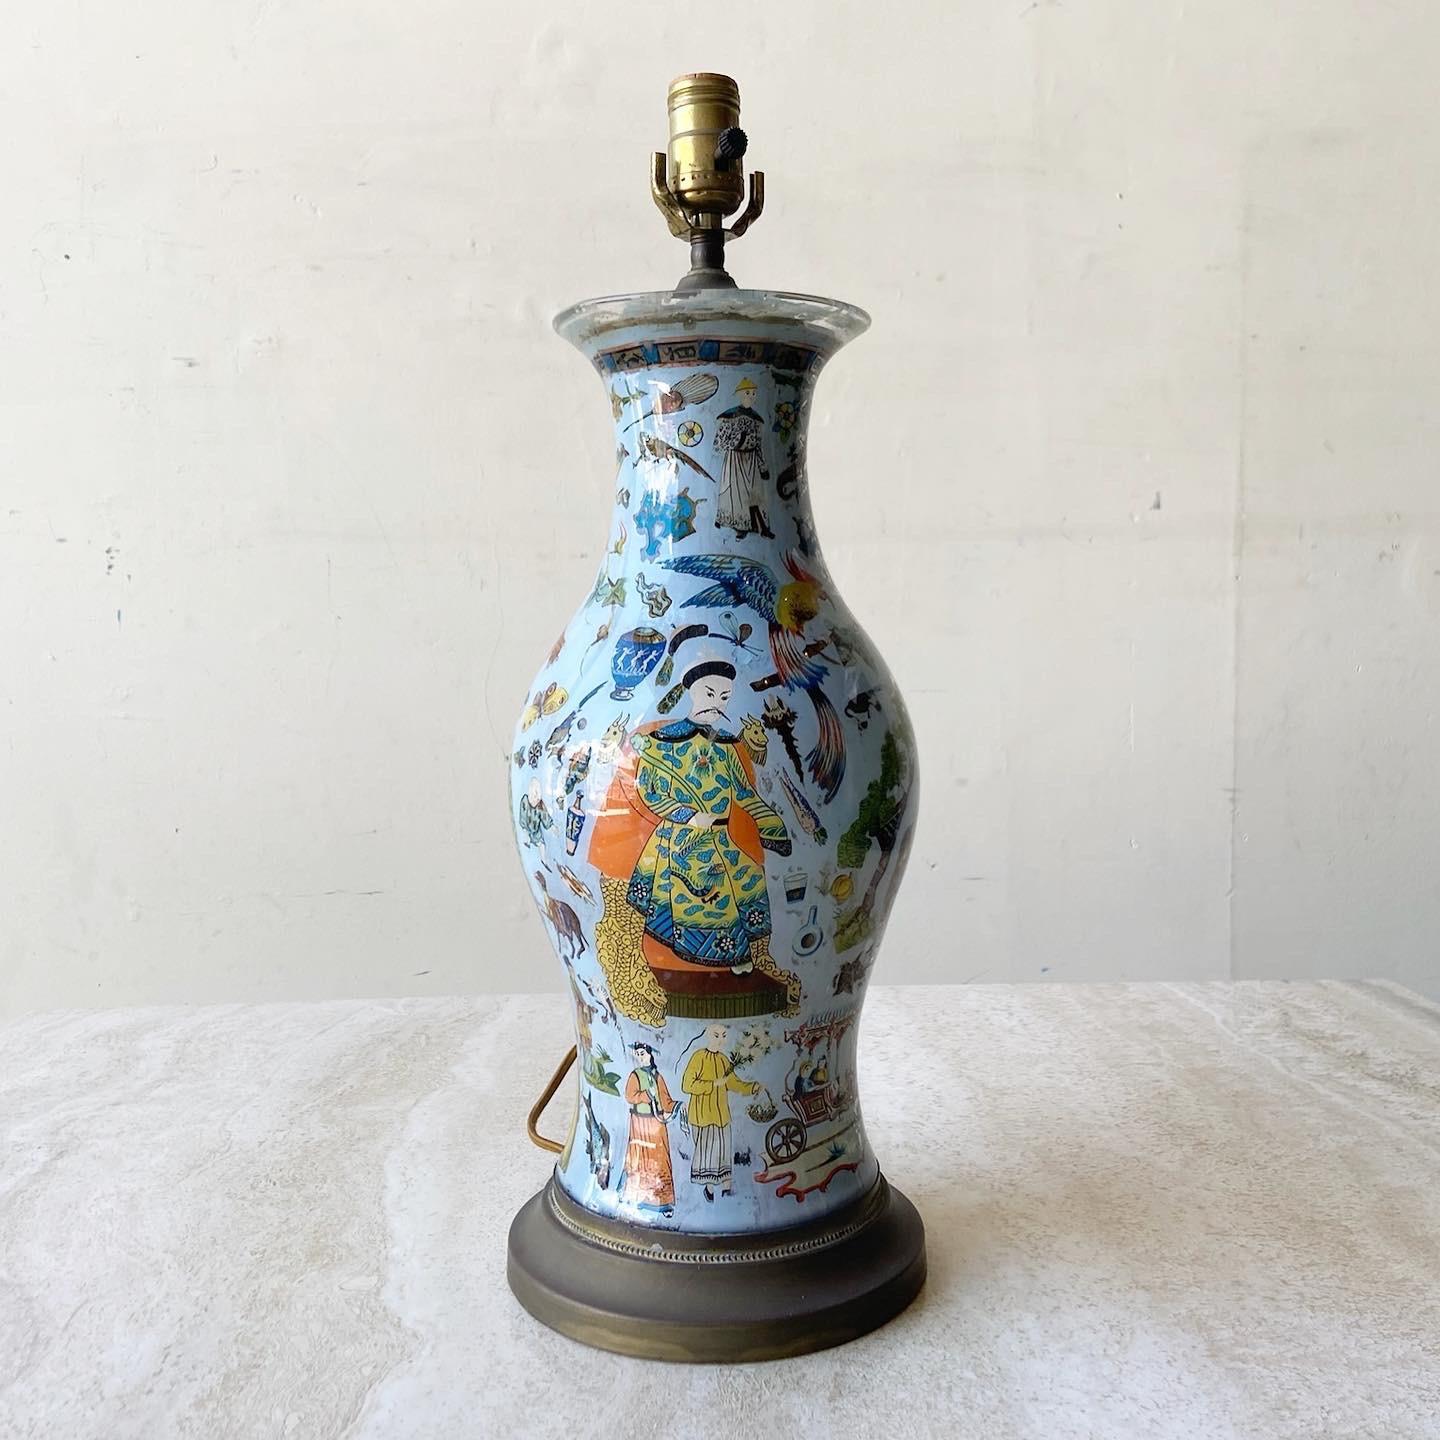 Amazing Chinese reverse painted glass table lamp. Features Chinese characters and depictions painted inside of the glass.

3 way lighting
